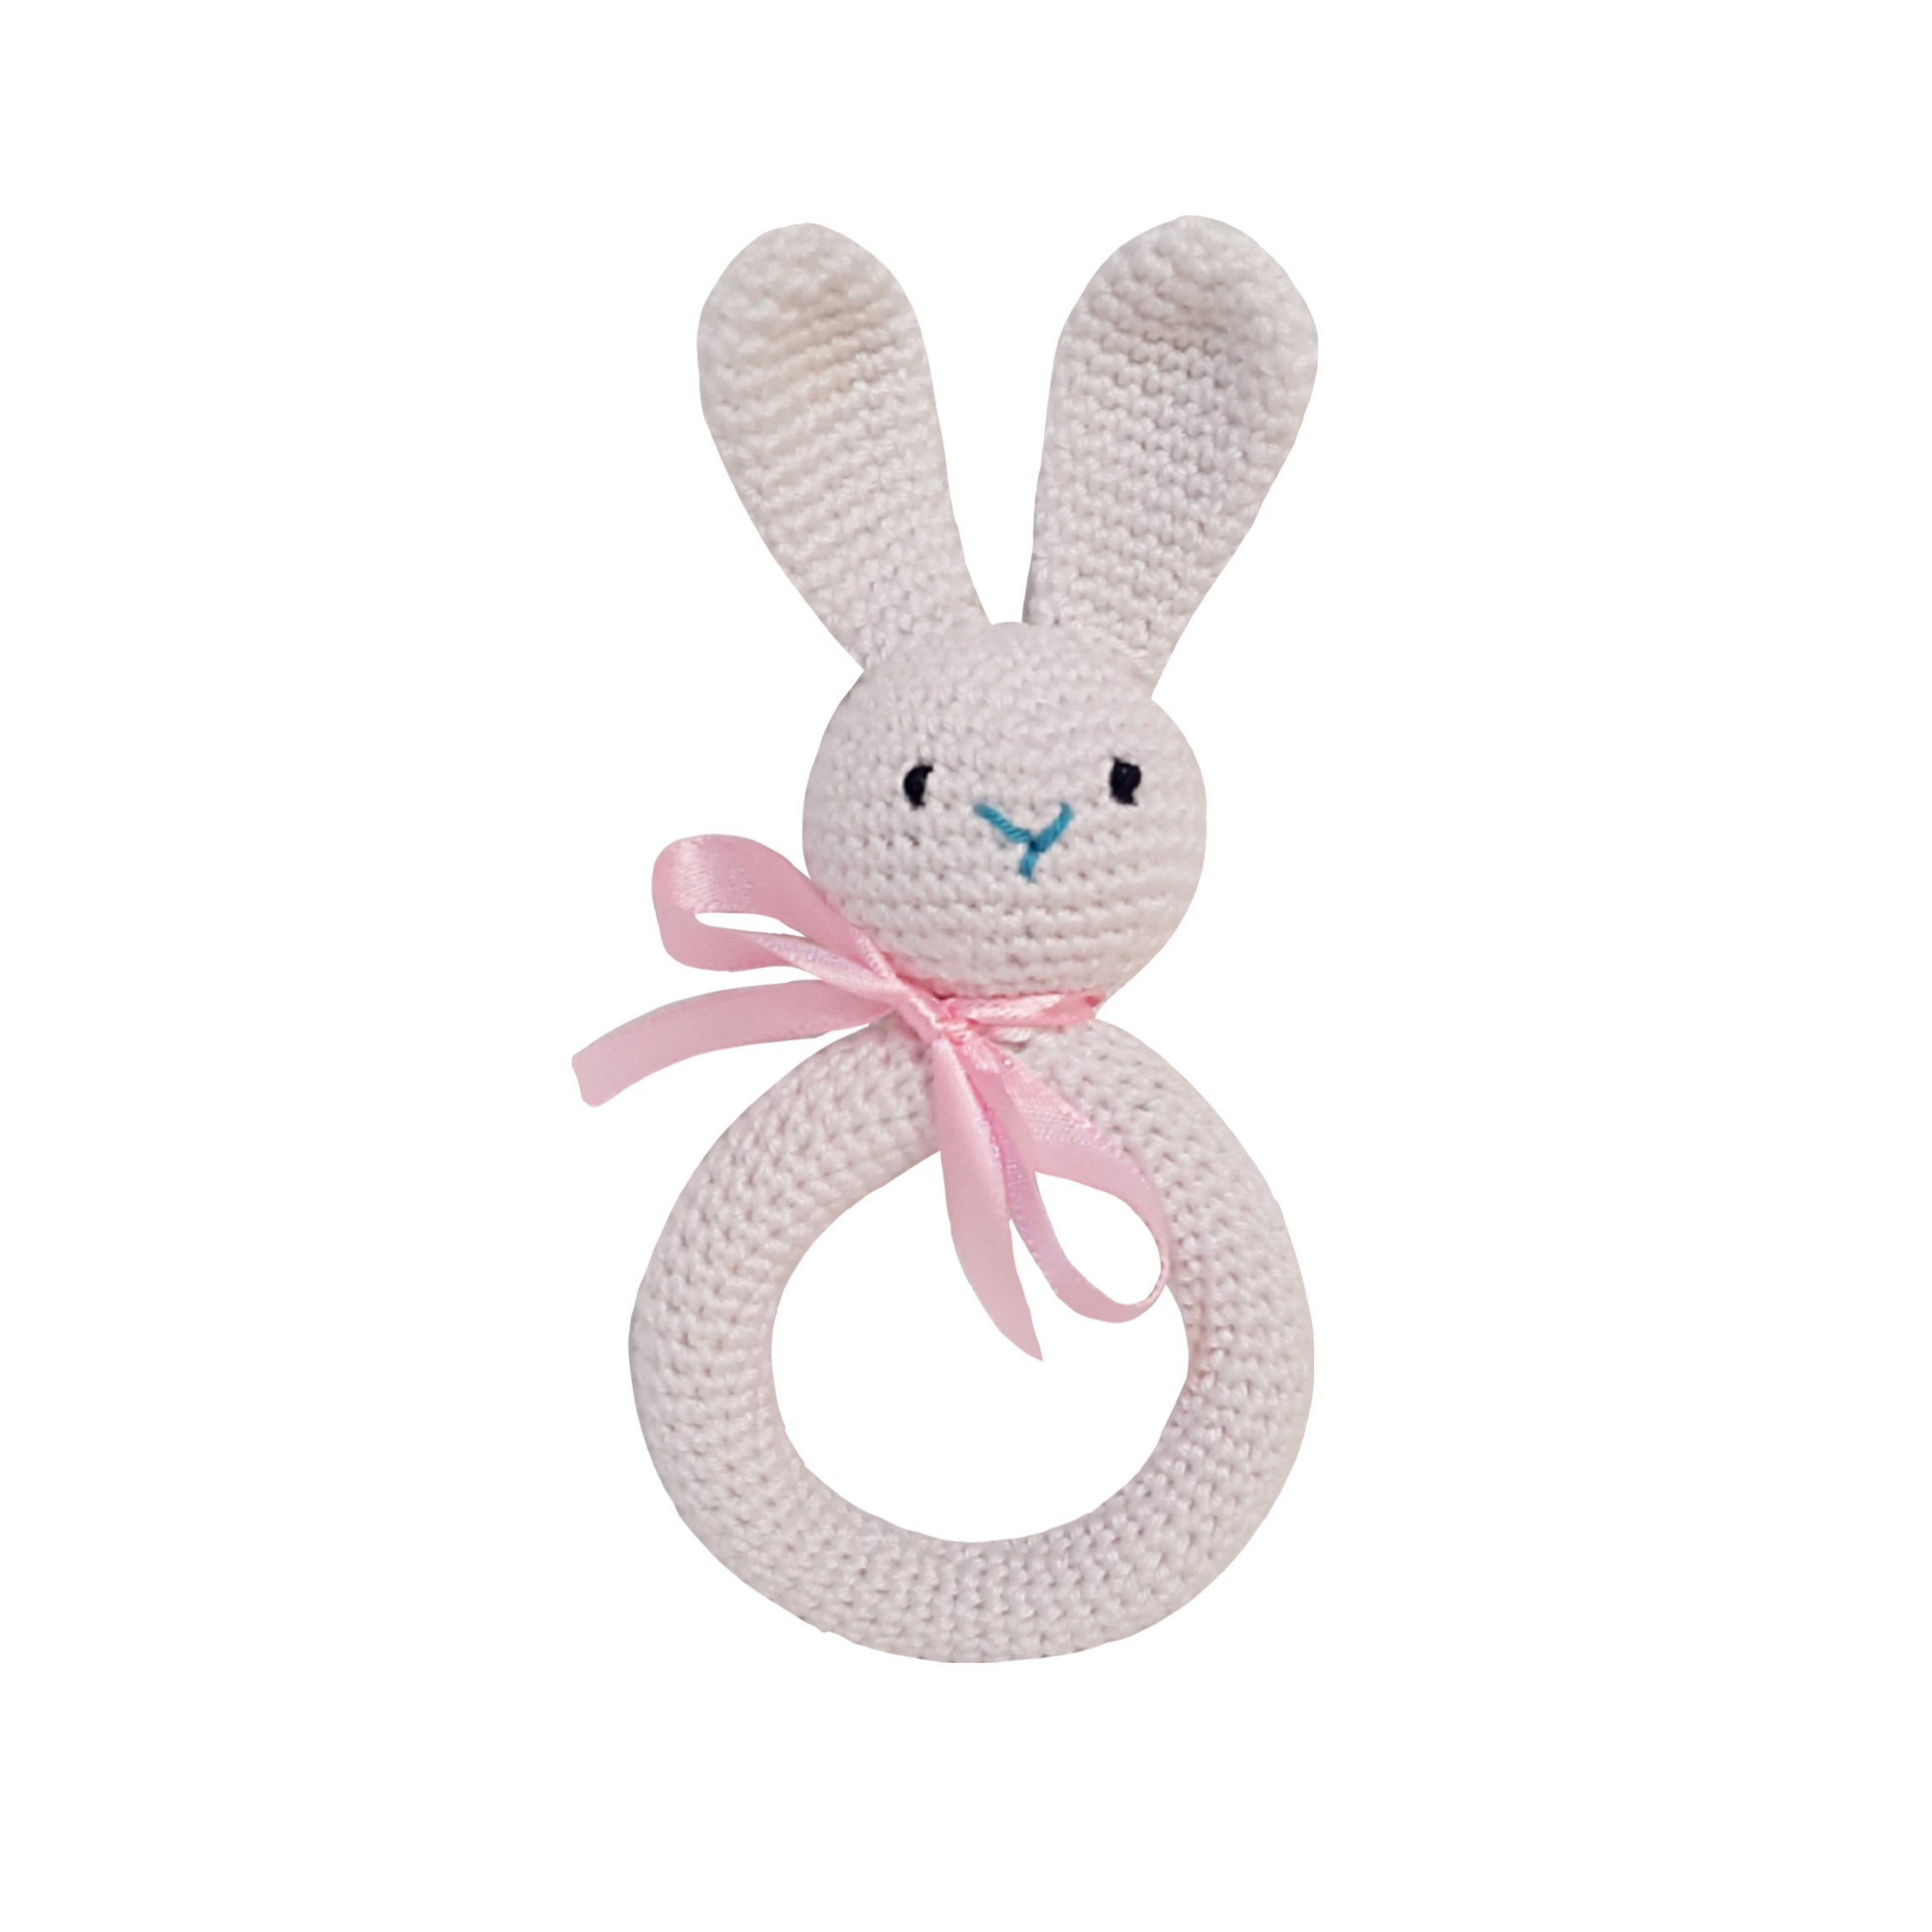 Pikkaboo - SnuggleandPlay Soft Crocheted Bunny set - White and Pink